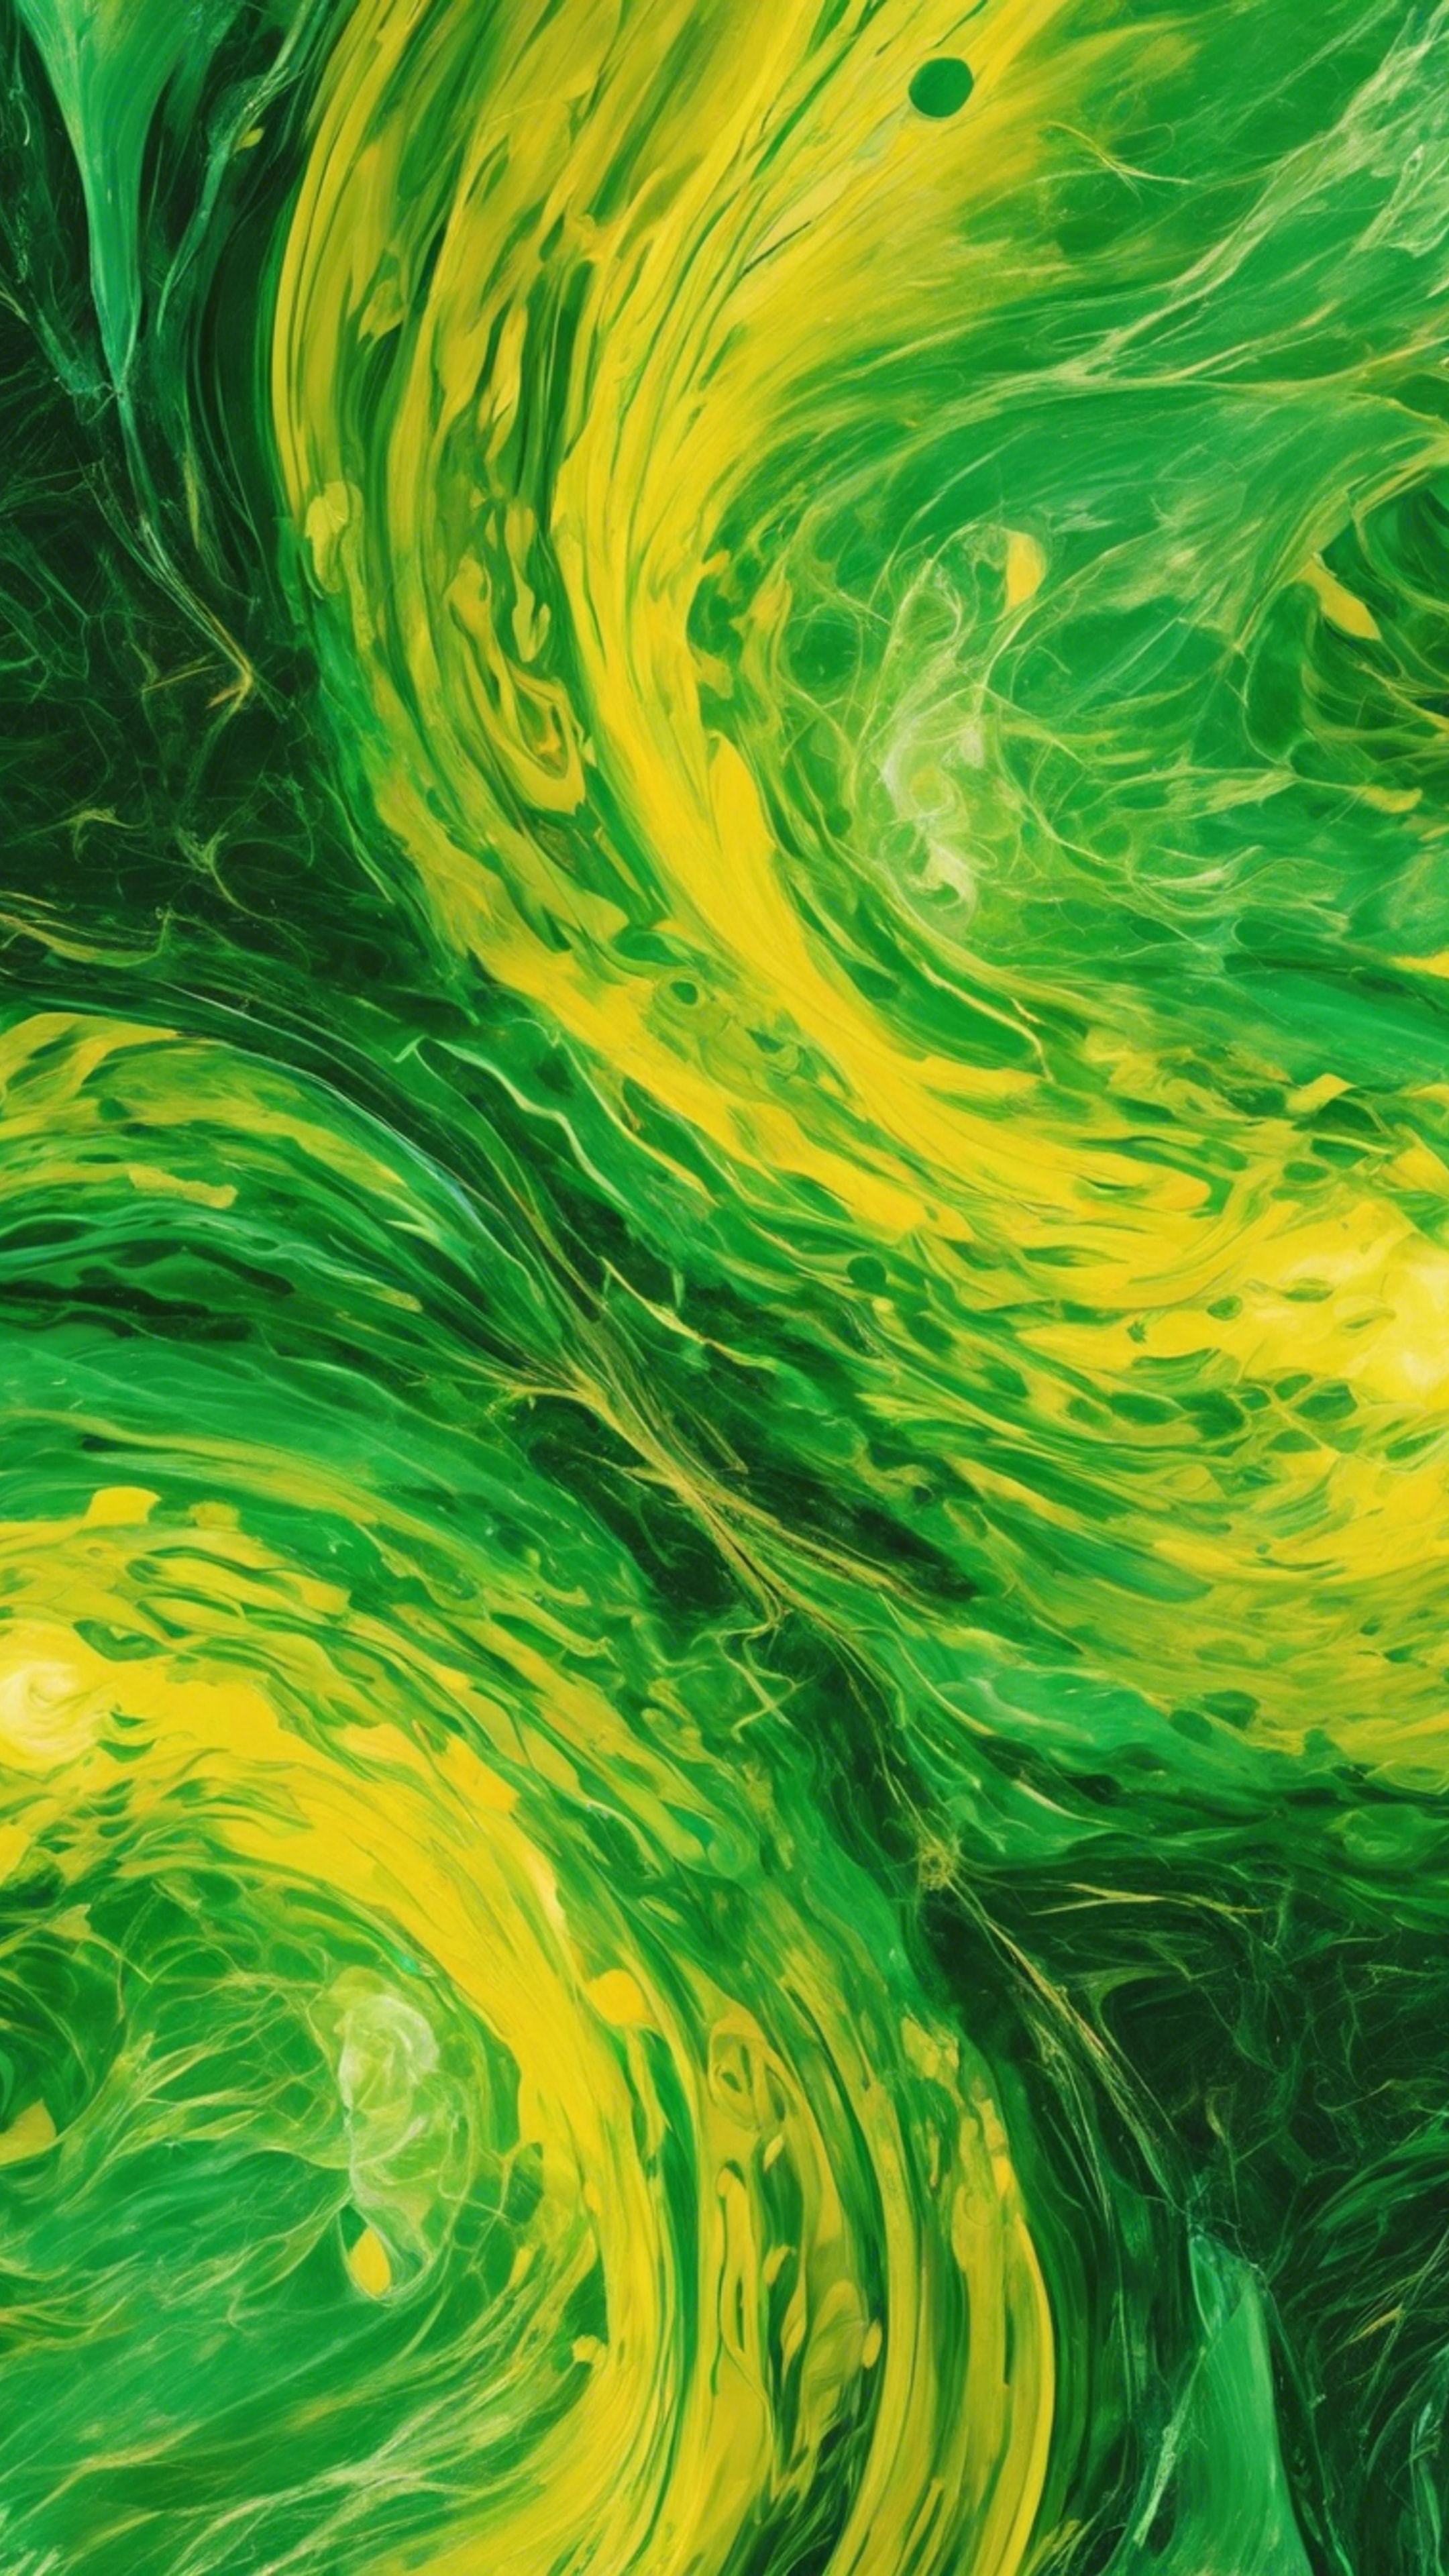 An abstract painting featuring energetic swirls of green and yellow.壁紙[b981946cabf14bcca898]